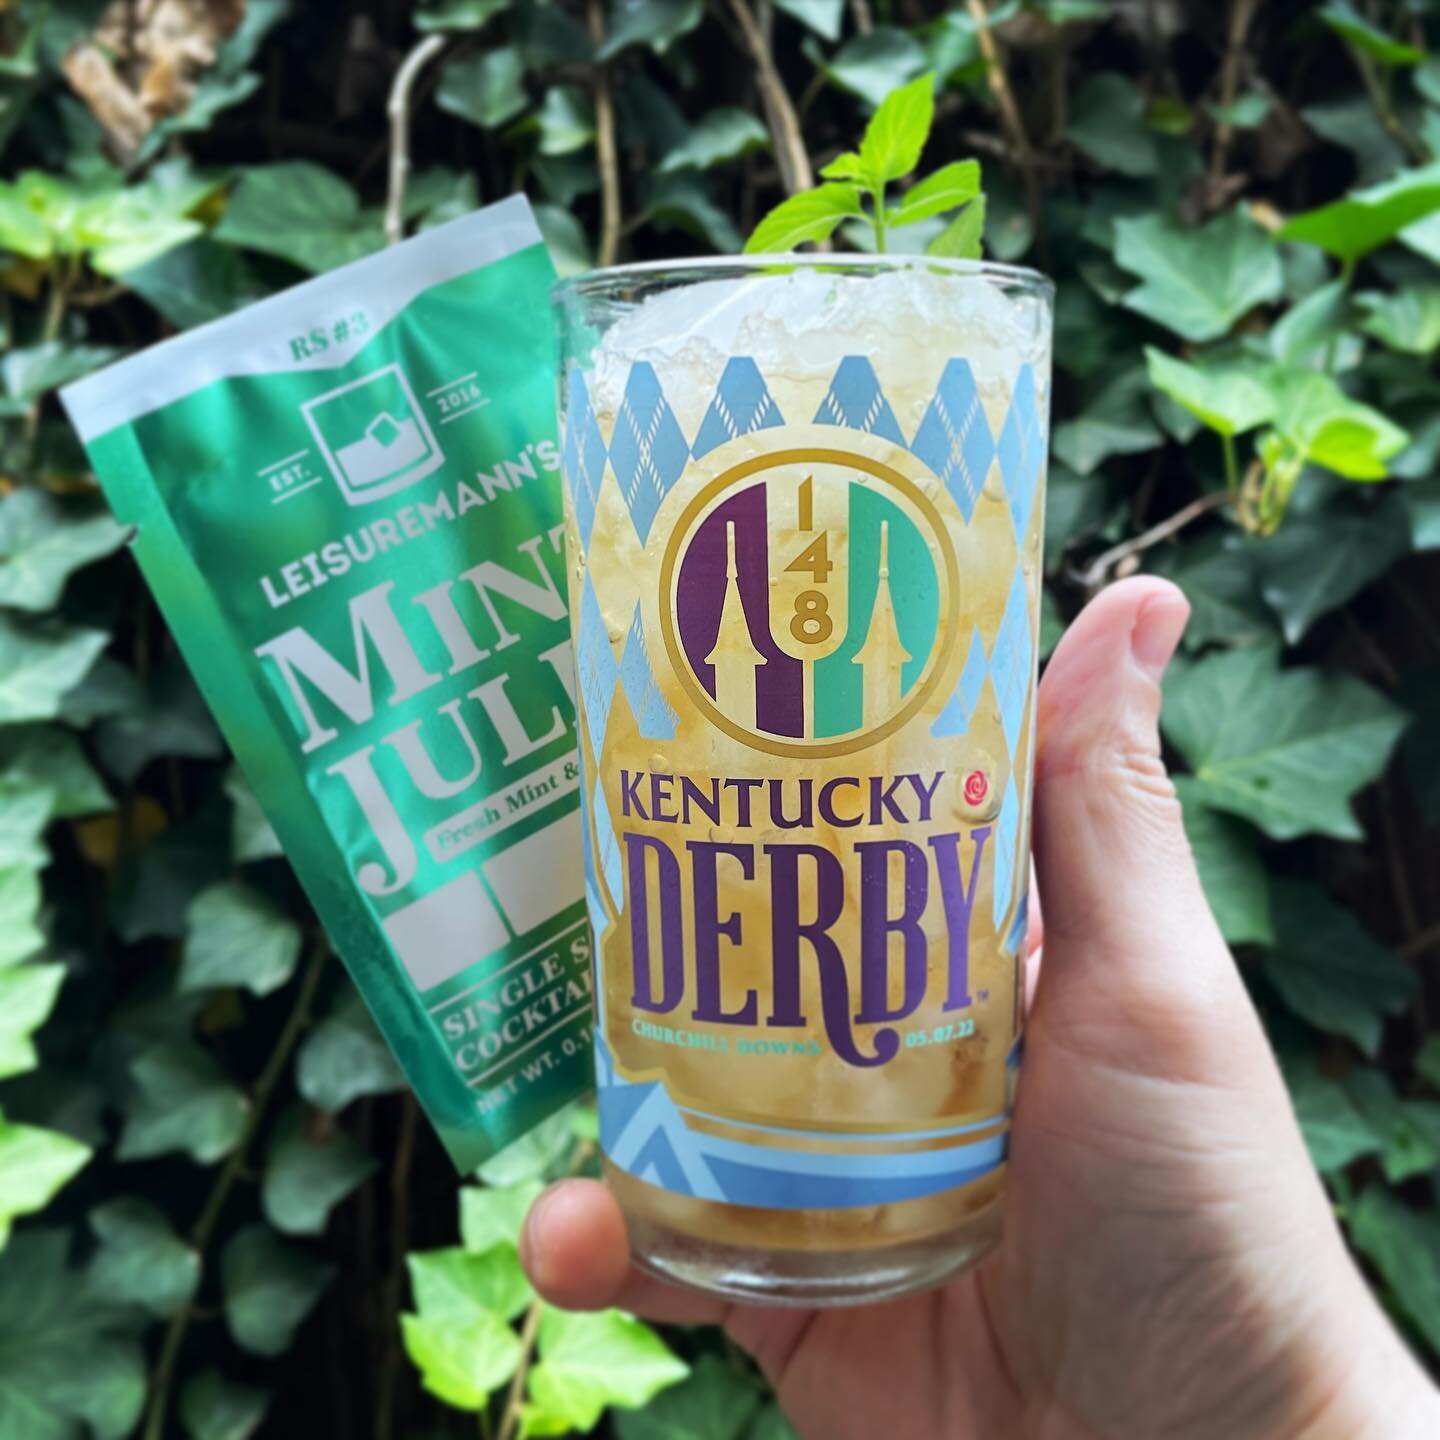 Enjoying the big race one Mint Julep at a time!!! Cheers to the @churchilldowns Kentucky Derby and cheers to the always delicious Mint Julep!!
&bull;
&bull;
&bull;
#kentuckyderby #mintjulep #mintjulepmonth #mintjuleps #bourbondrinker #kentuckyderbypa